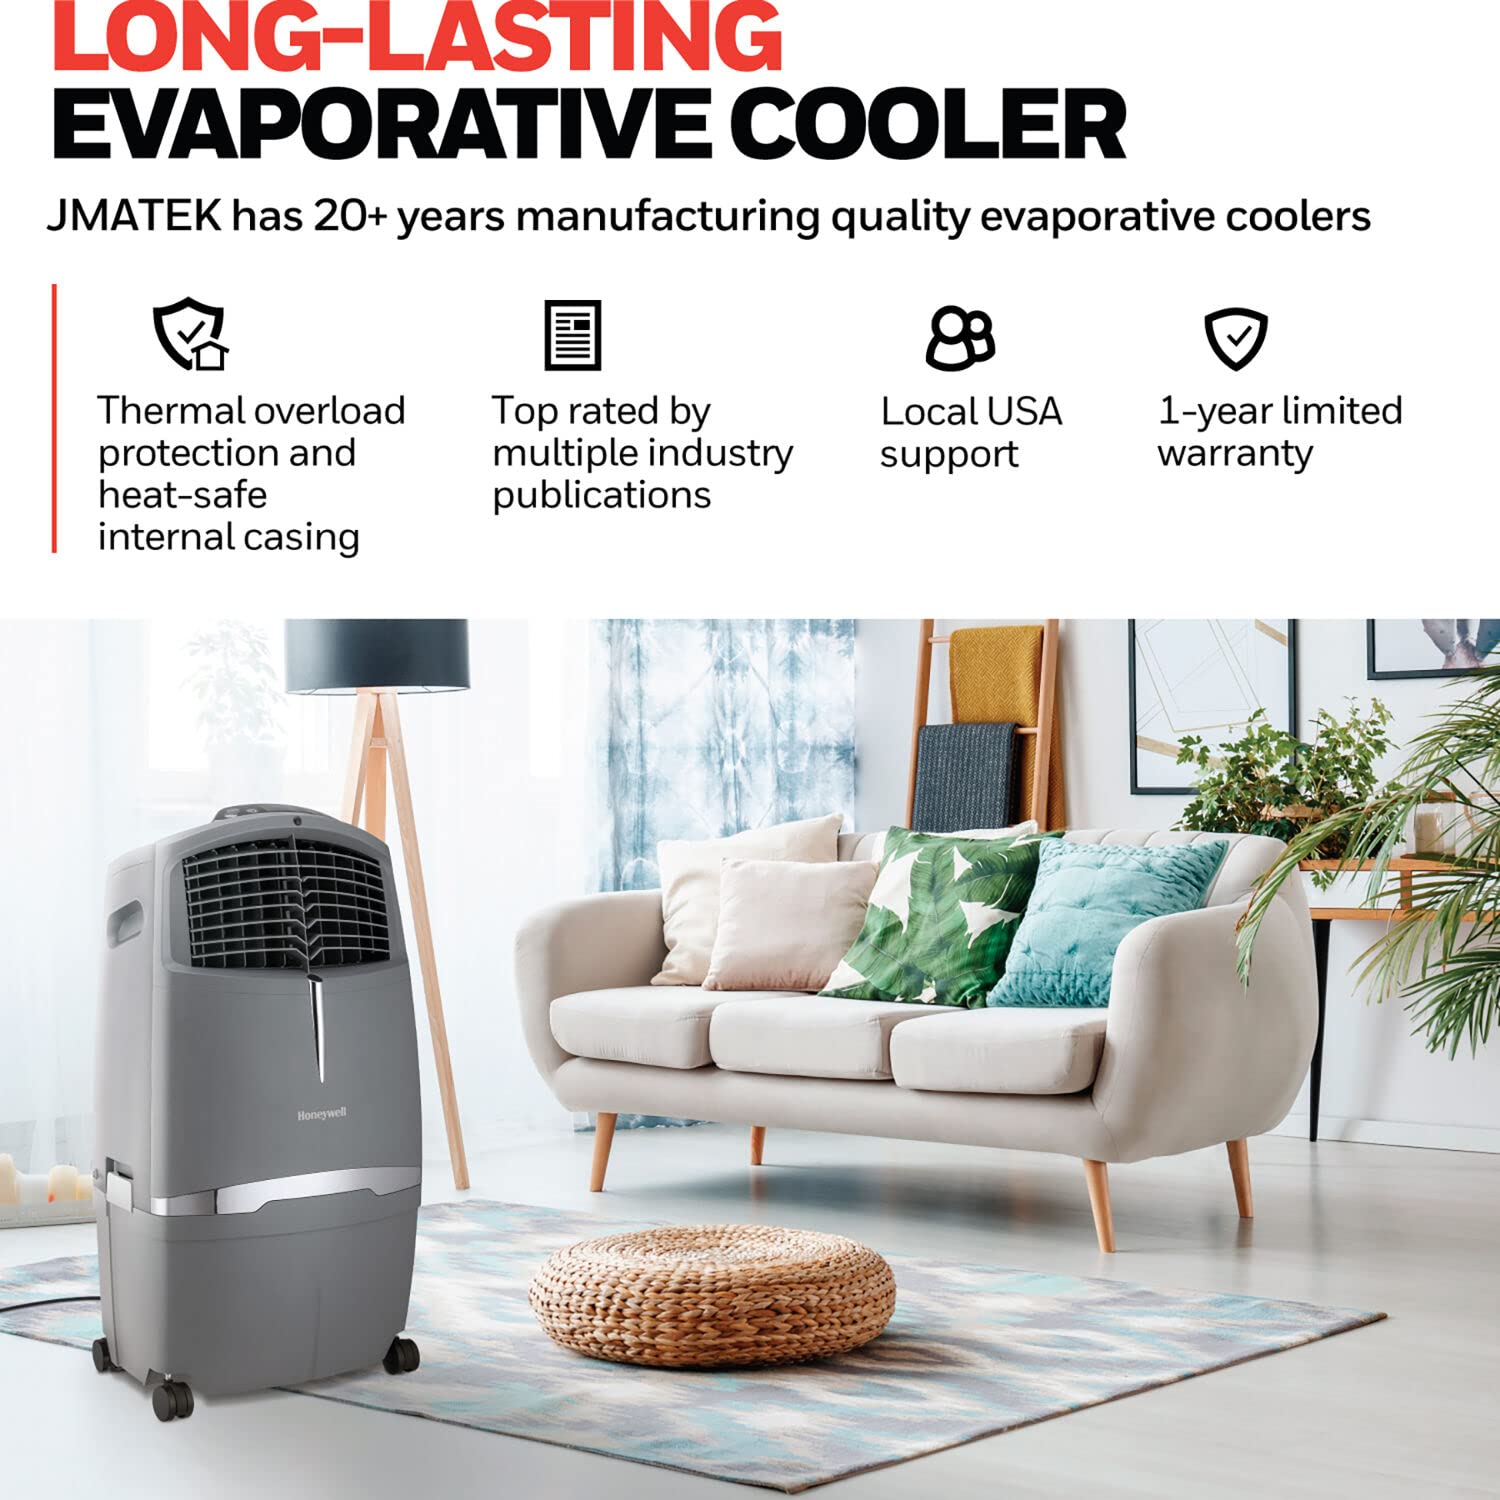 Honeywell 525 CFM Indoor Portable Evaporative Air Cooler, Fan & Humidifier with Ice Compartment & Remote, Gray